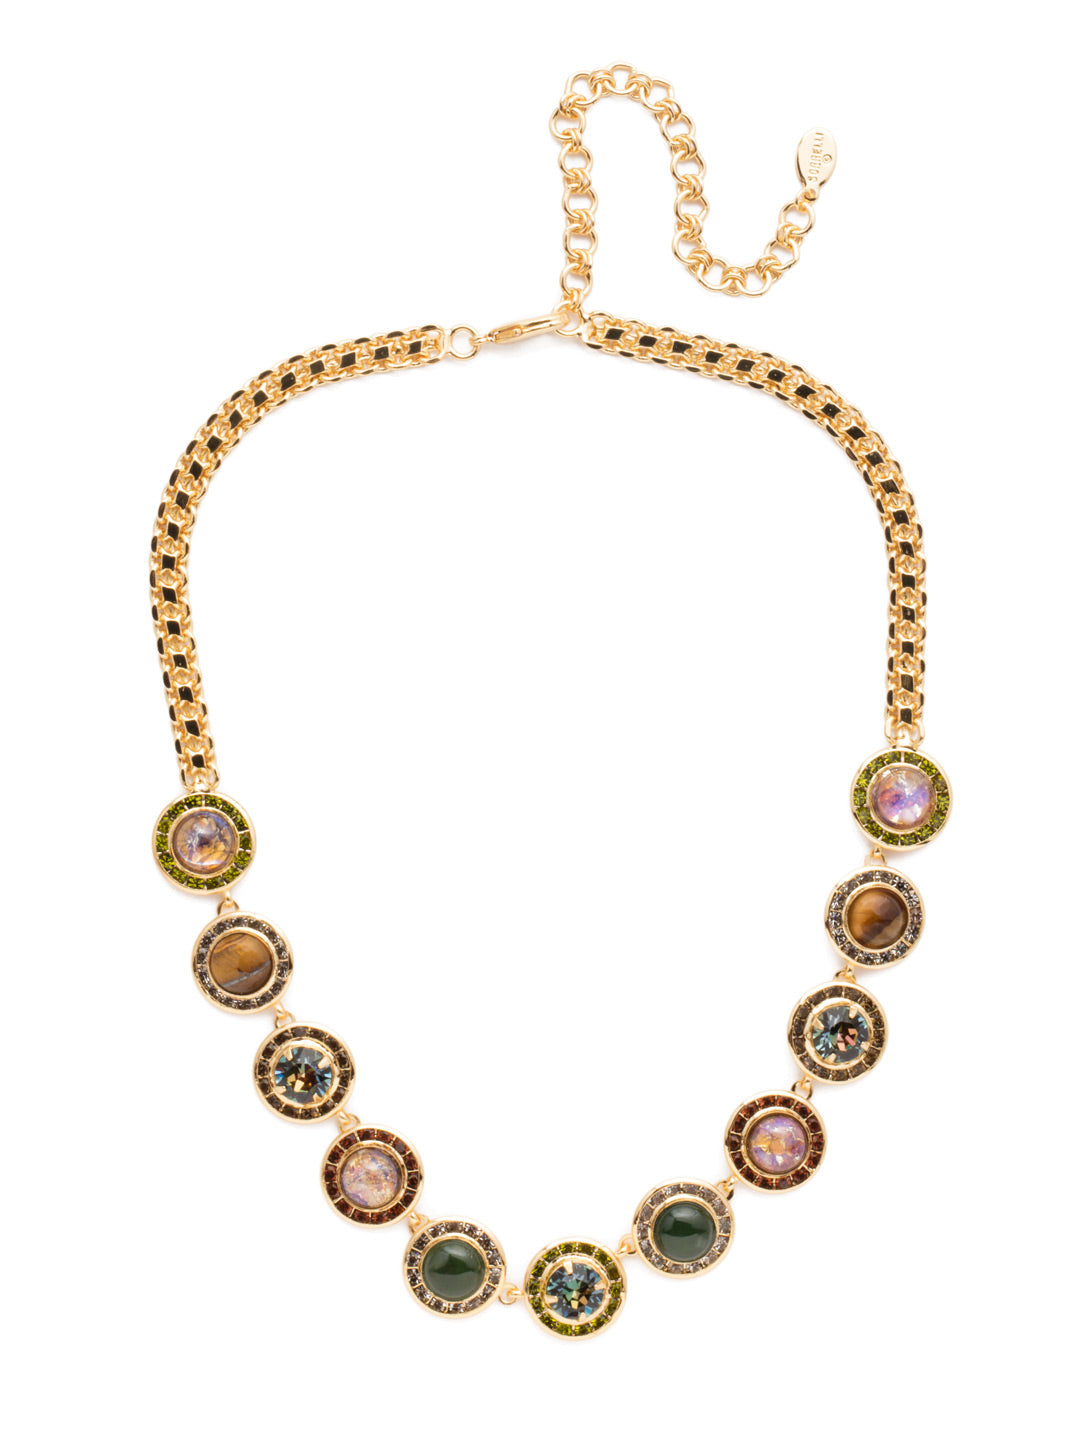 Kaia Statement Necklace - NET10BGCSM - The Kaia Statement Necklace is bold with its chunky chainmetal strand that gives way to irredescent gems rimmed in stunning, sparkling crystals. From Sorrelli's Cashmere collection in our Bright Gold-tone finish.